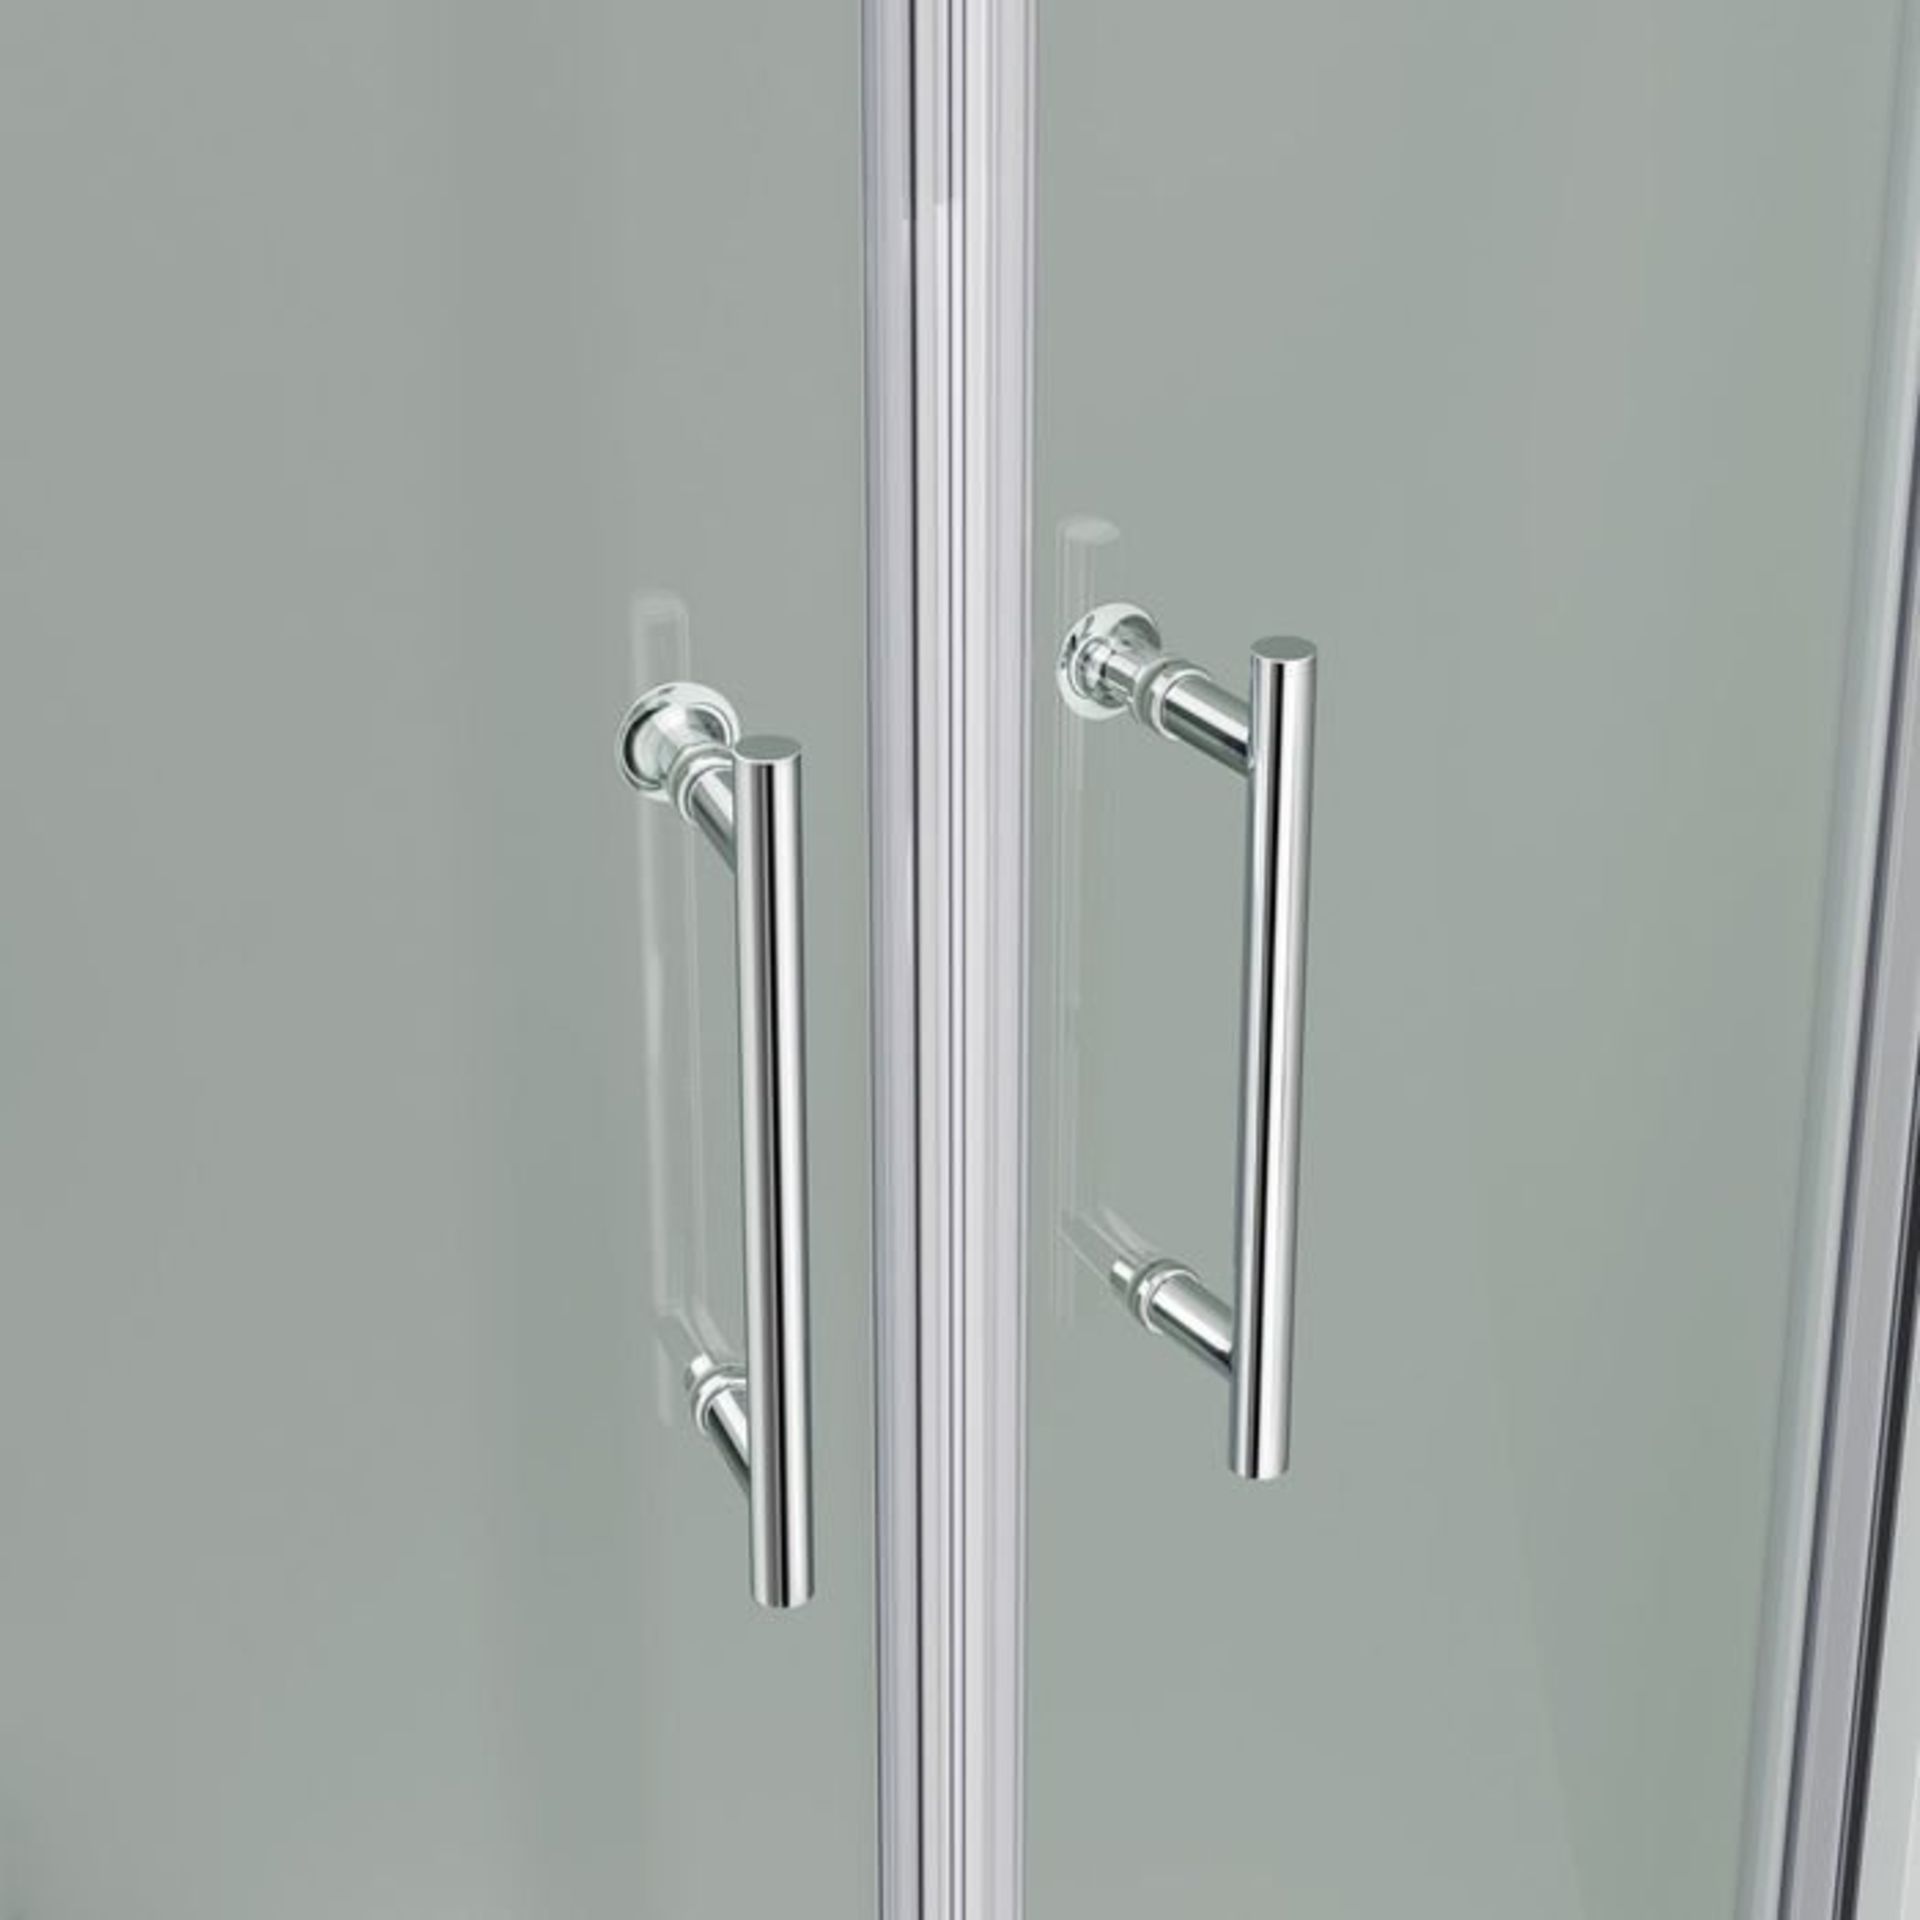 (H53) 800x800mm - 6mm - Elements Quadrant Shower Enclosure RRP £272.99 6mm Safety Glass Fully - Image 6 of 7